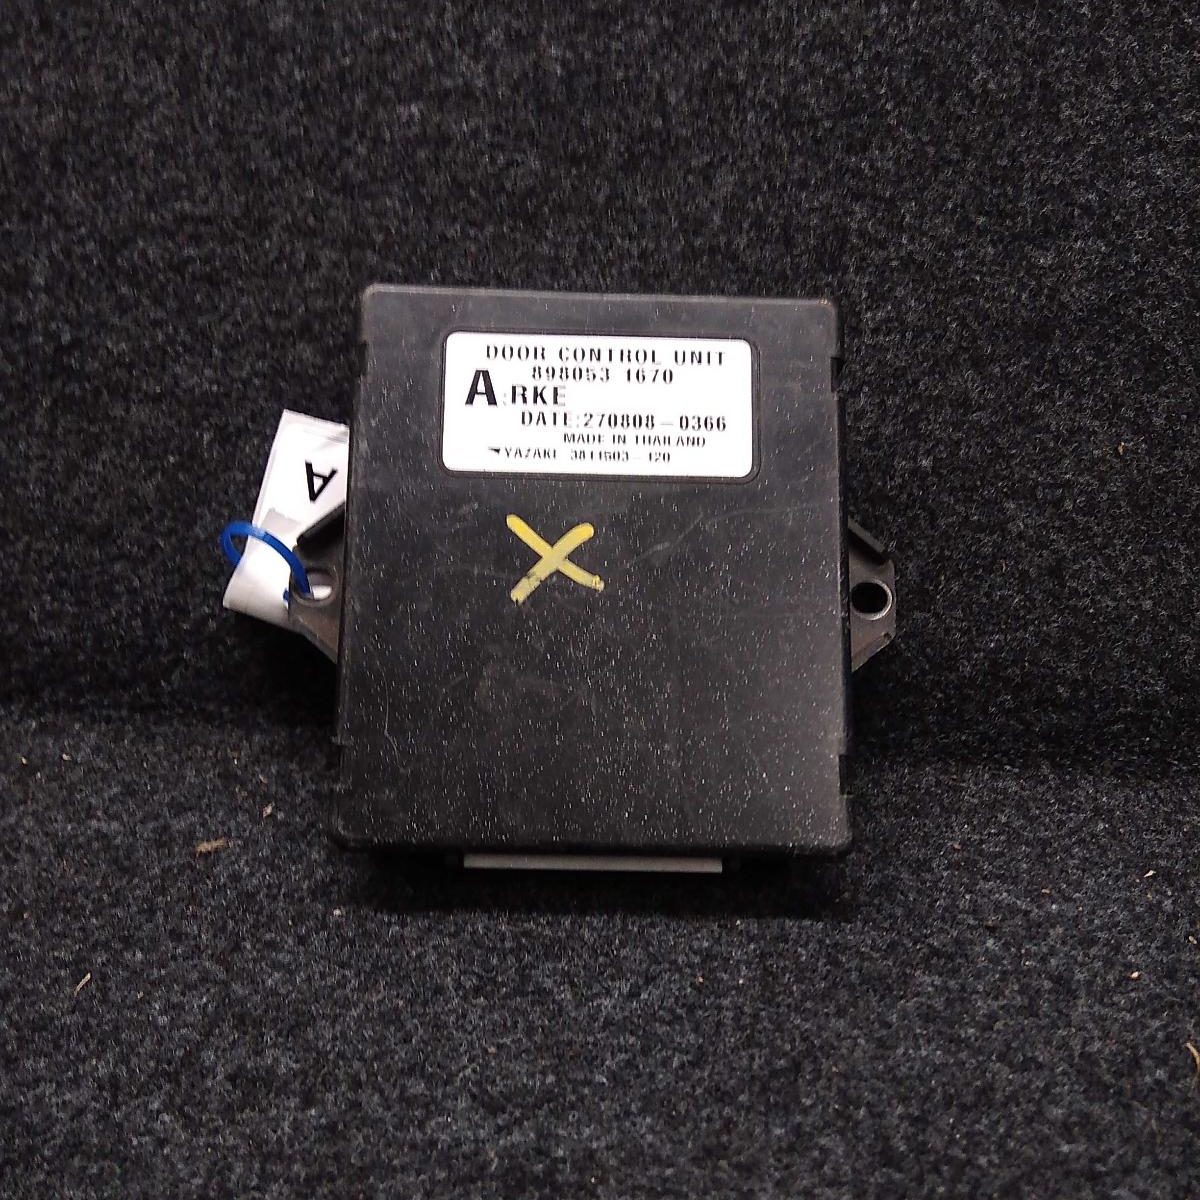 2010 HOLDEN COLORADO MISC SWITCH/RELAY